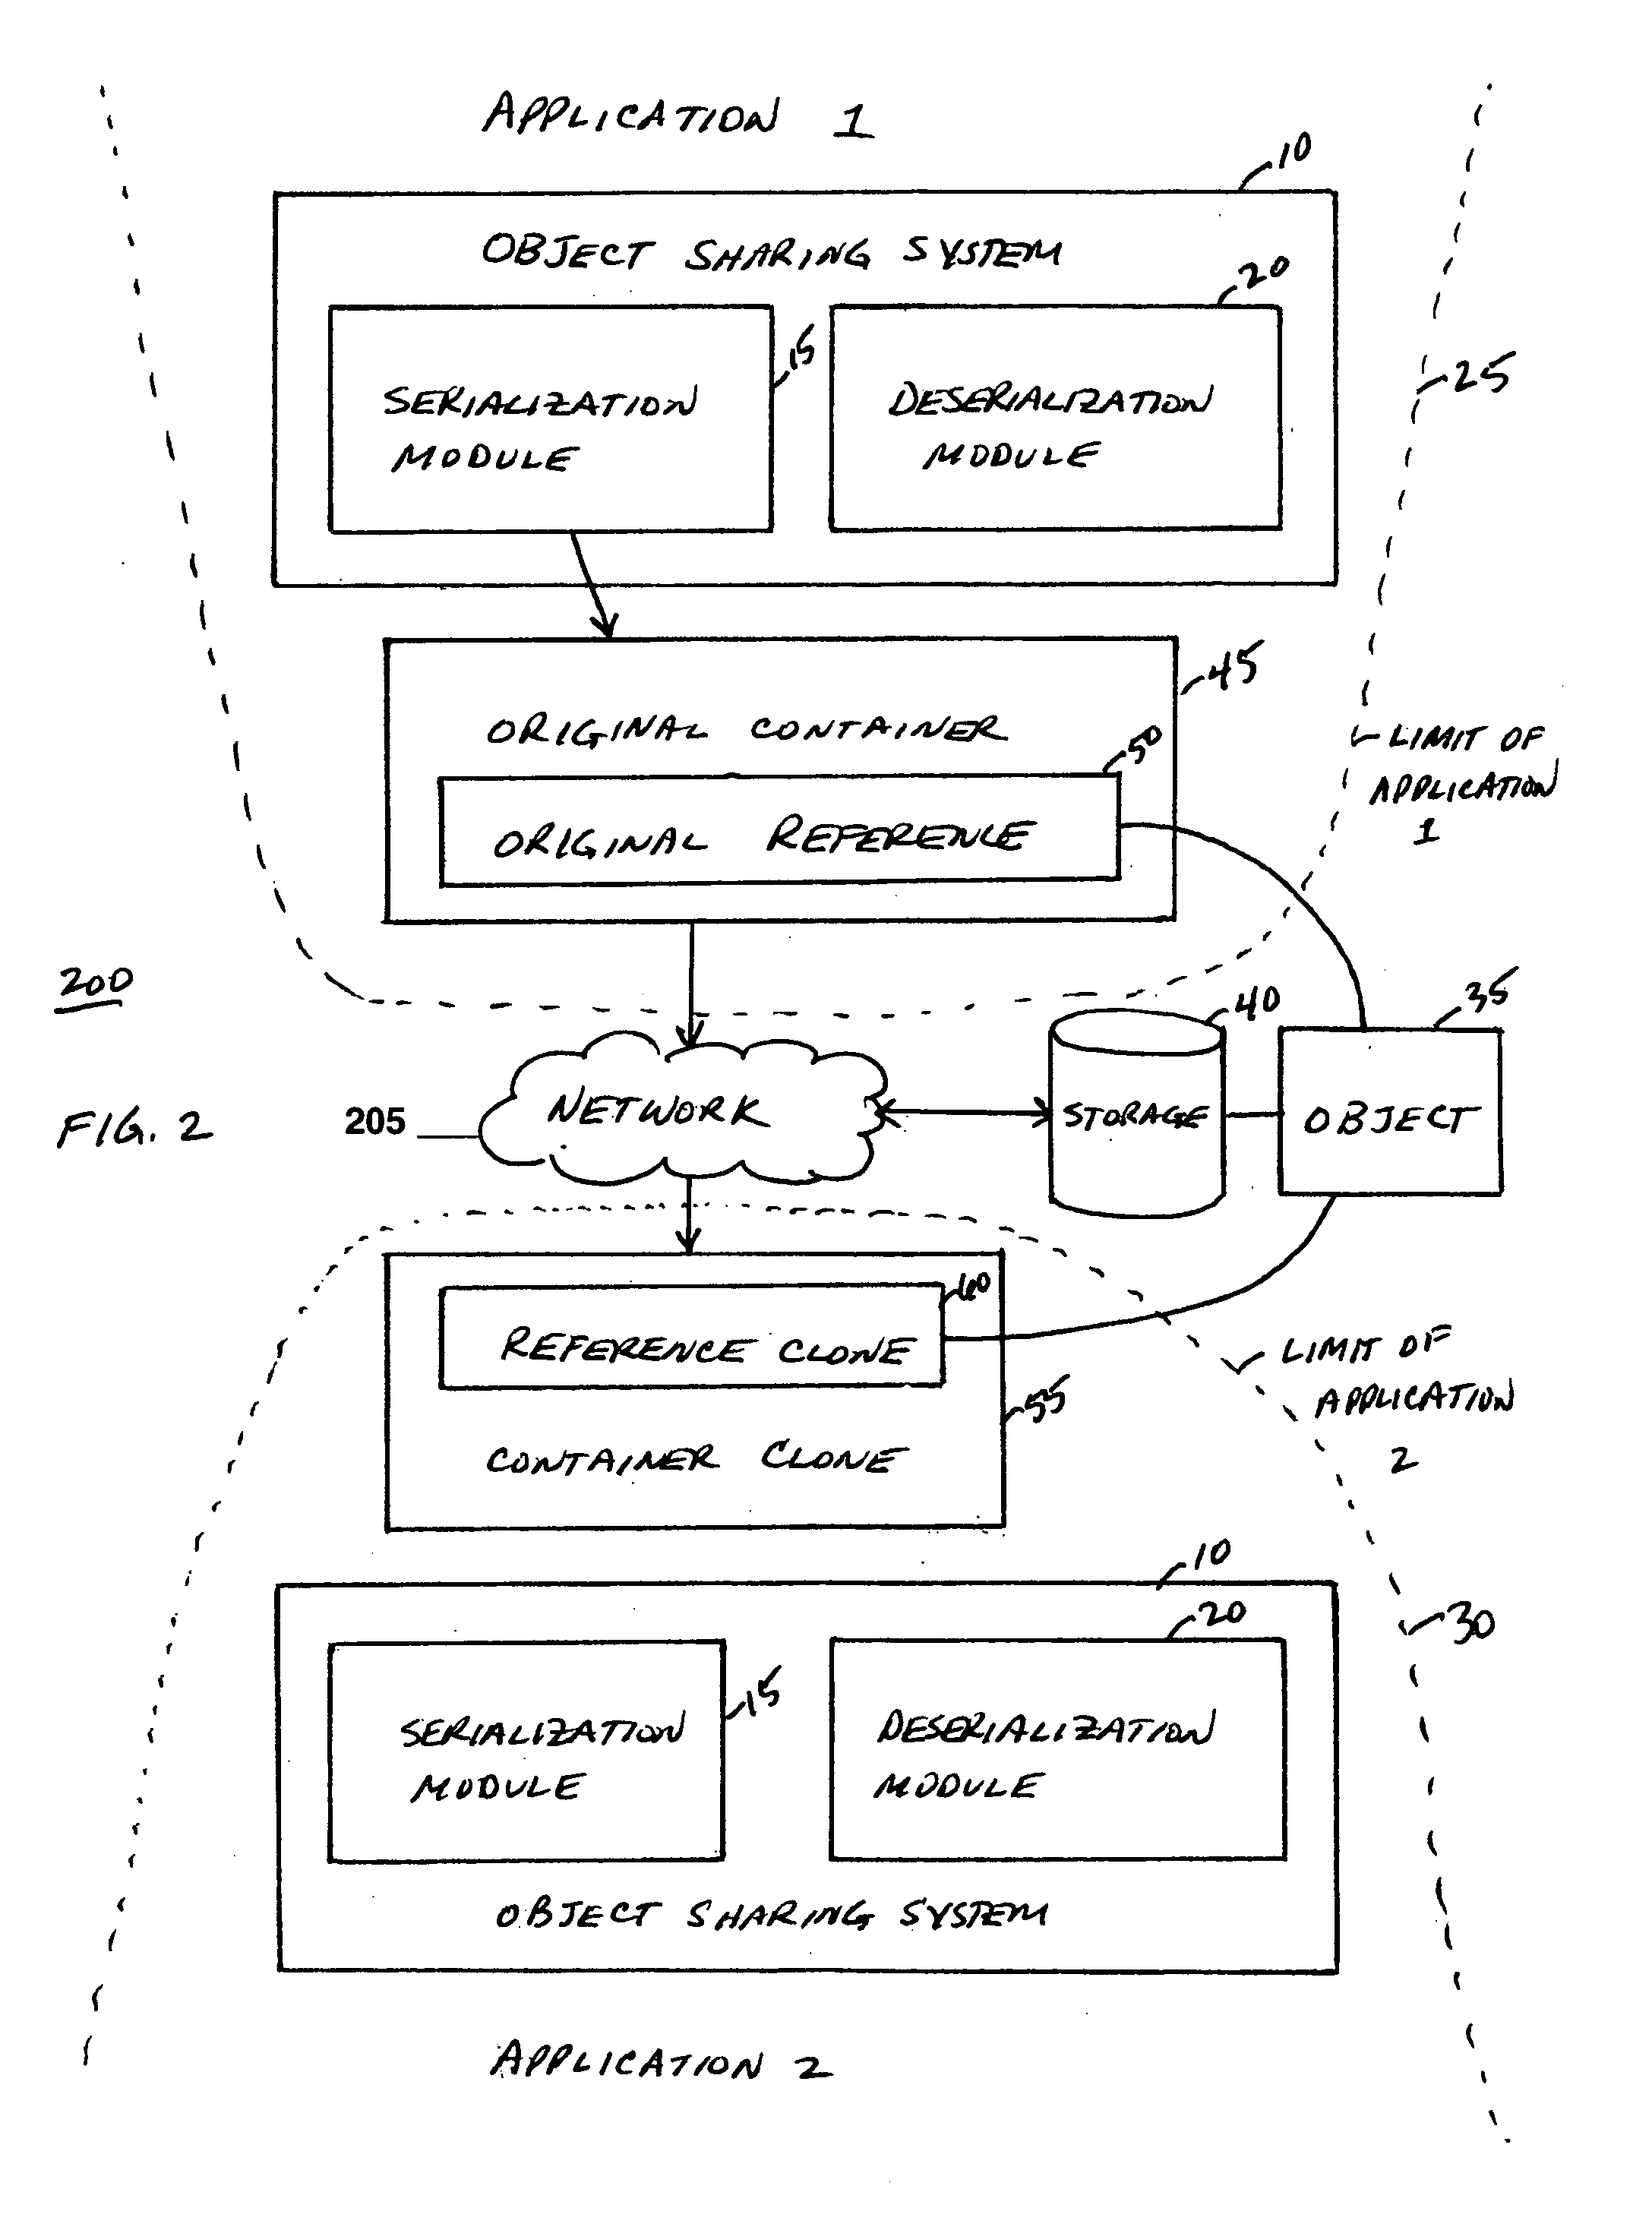 System and method for sharing an object between applications